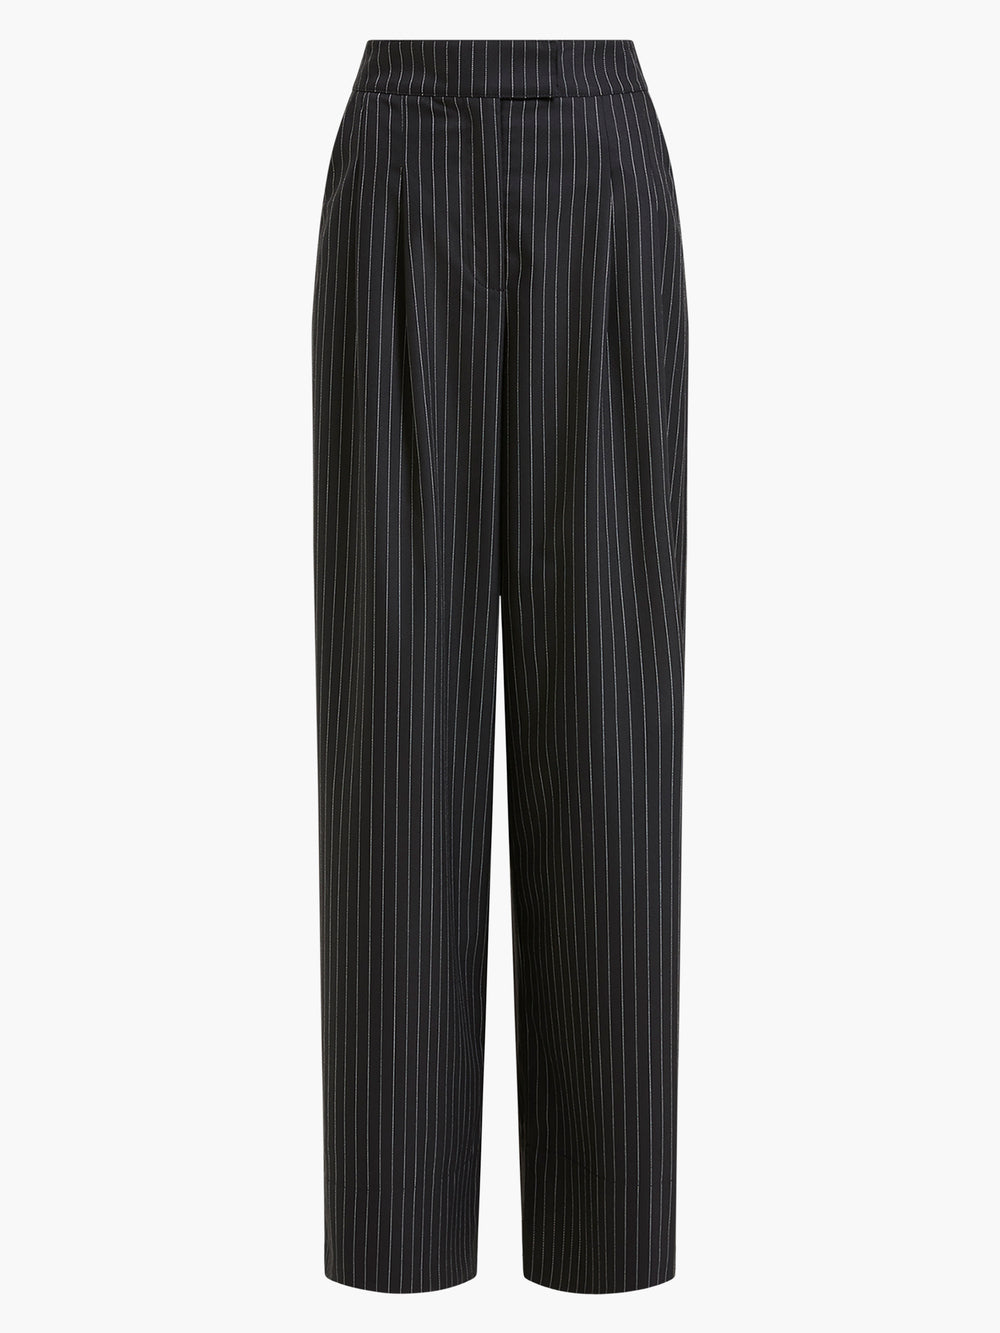 Finn Stripe Trousers Blackout | French Connection UK